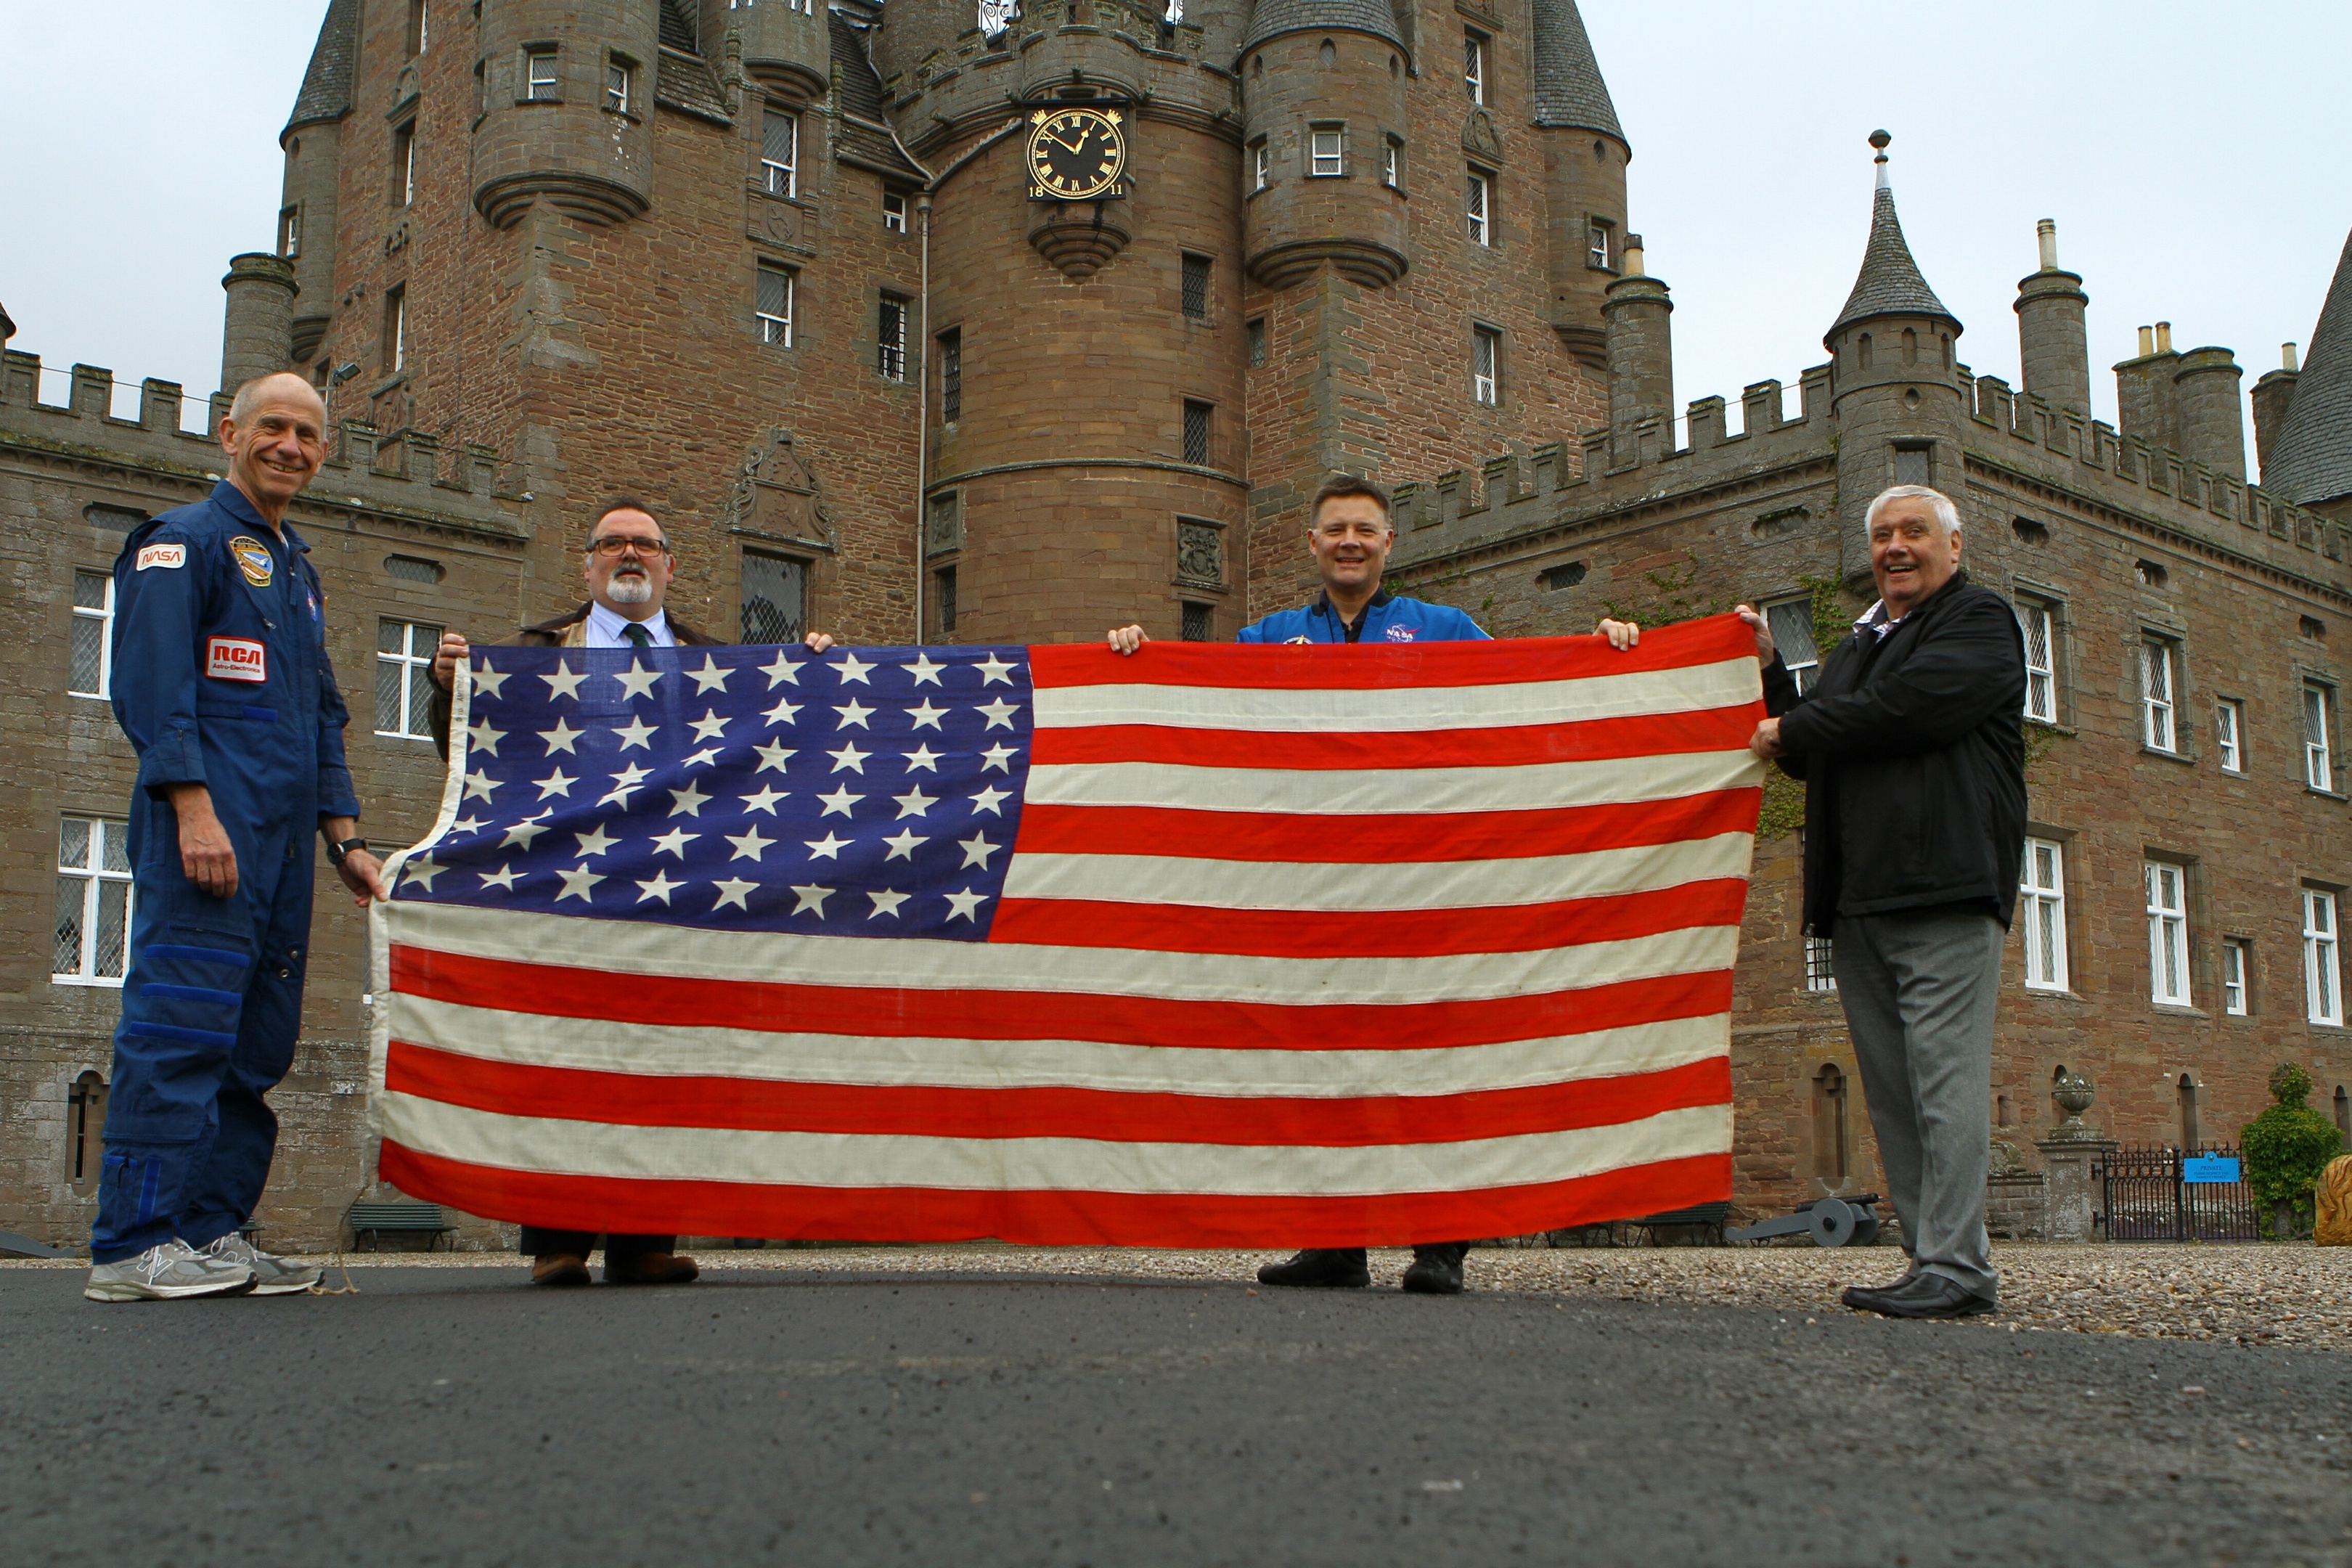 Picture shows former astronaut Bob Cenker, Tommy Baxter, general manager of Glamis Castle, astronaut Doug Wheelock and John J Smith MBE former NASA employee, at the handover of the American flag from Glamis Castle, which will be taken into space.